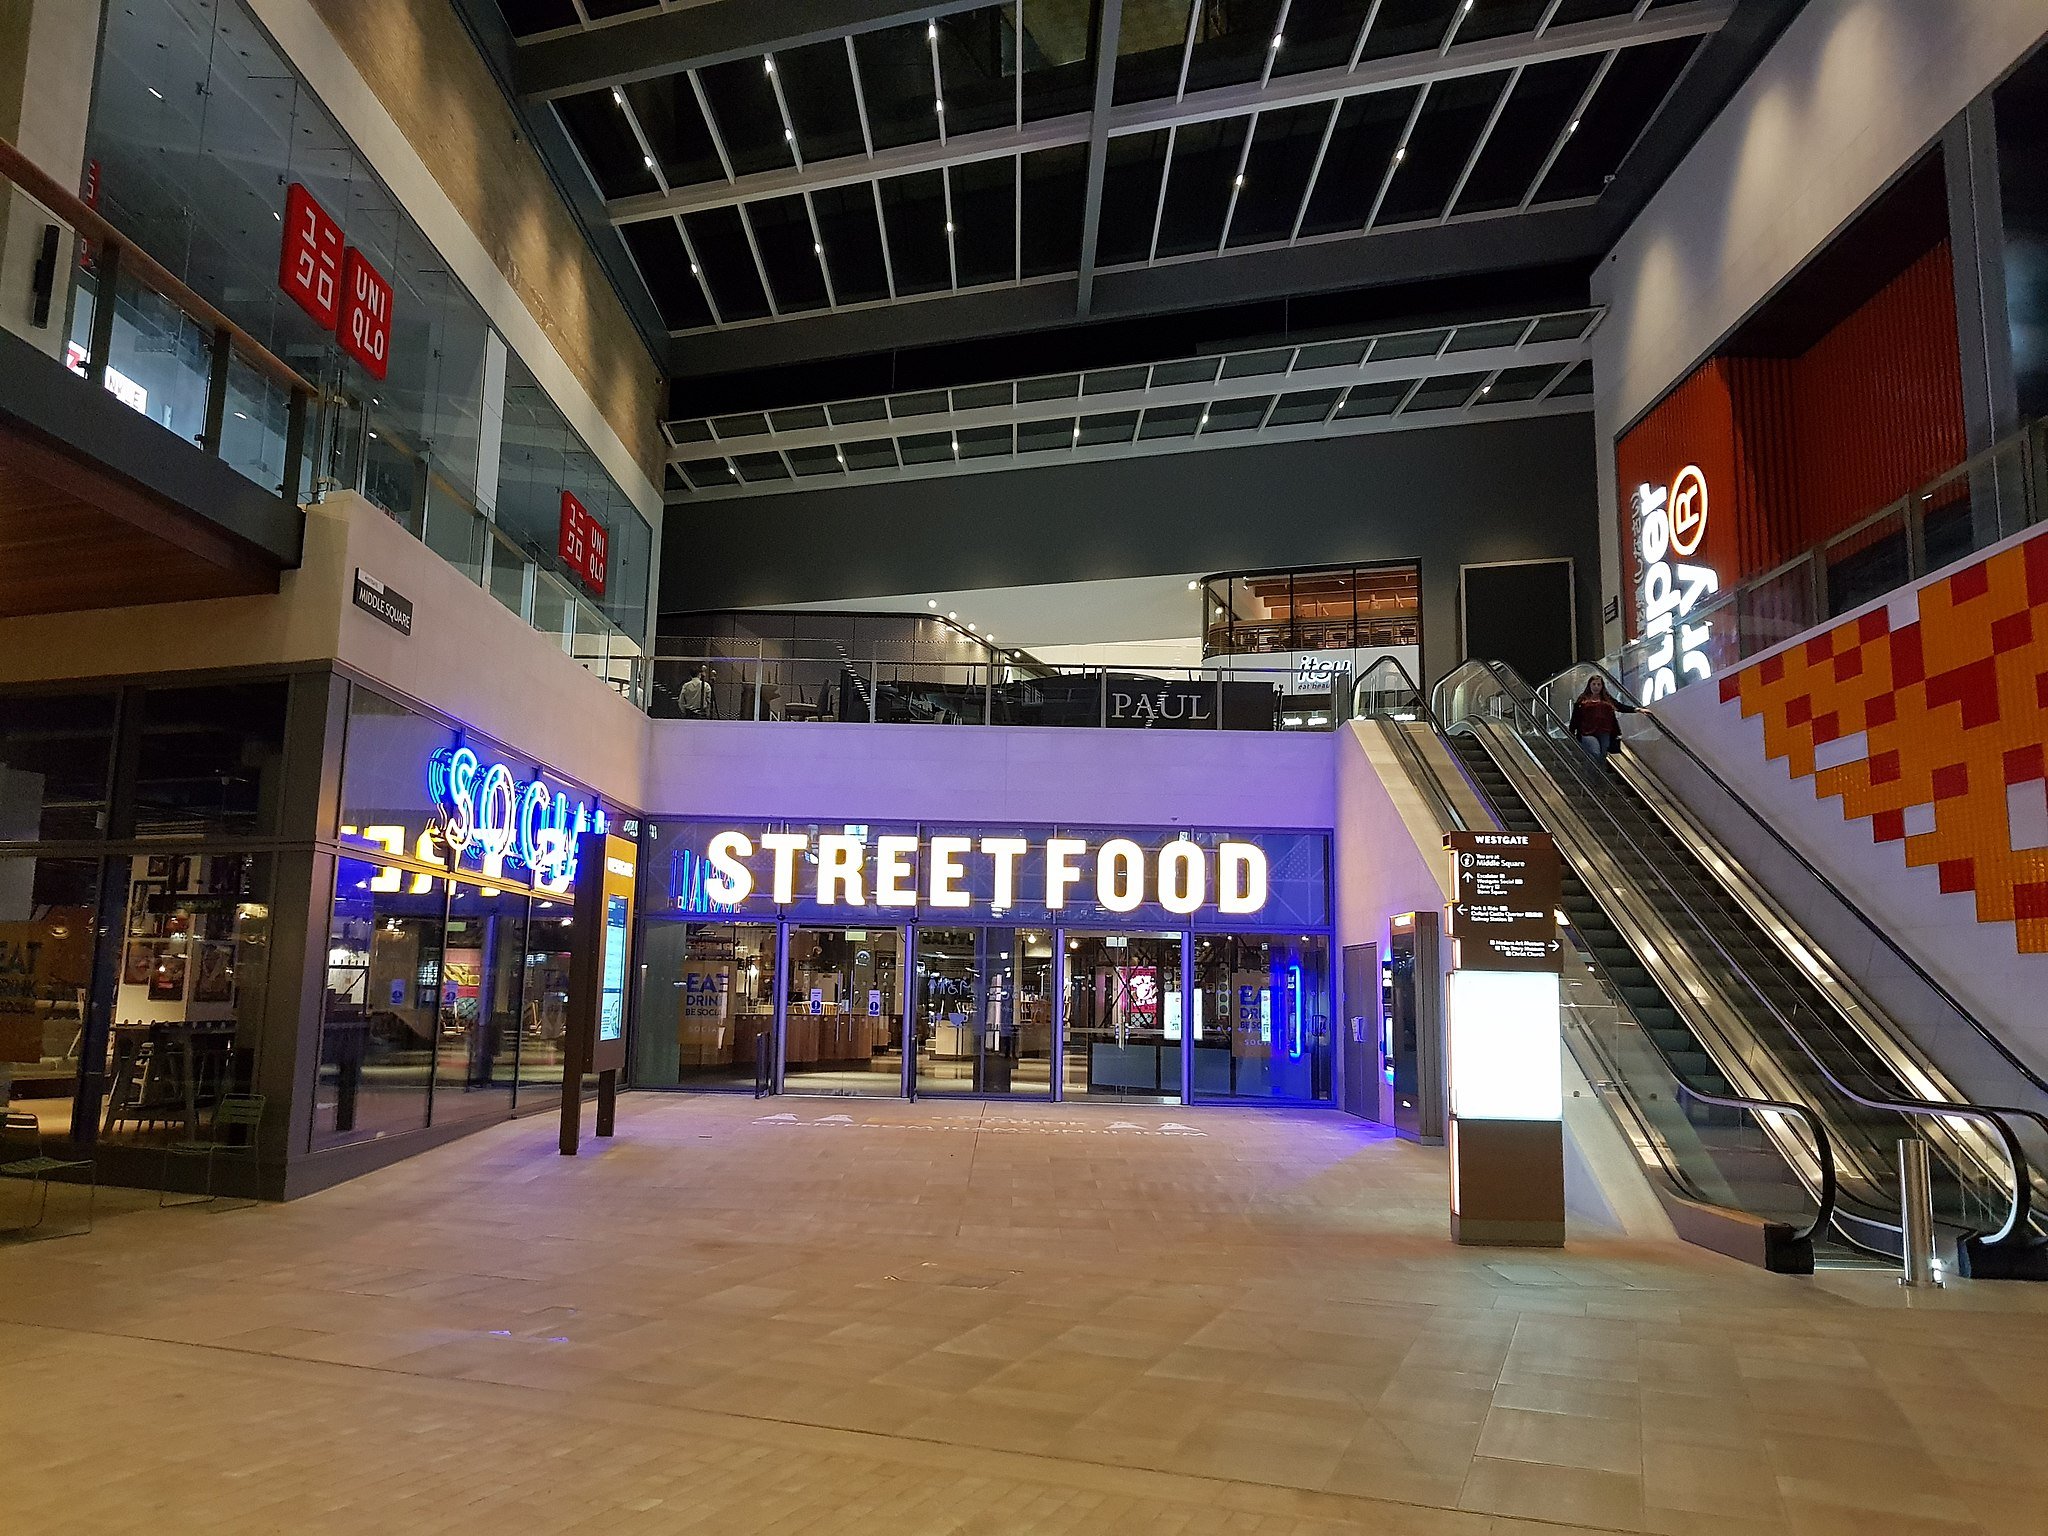 View inside Westgate Shopping Centre showing Westgate Streetfood, with escalators on the right side